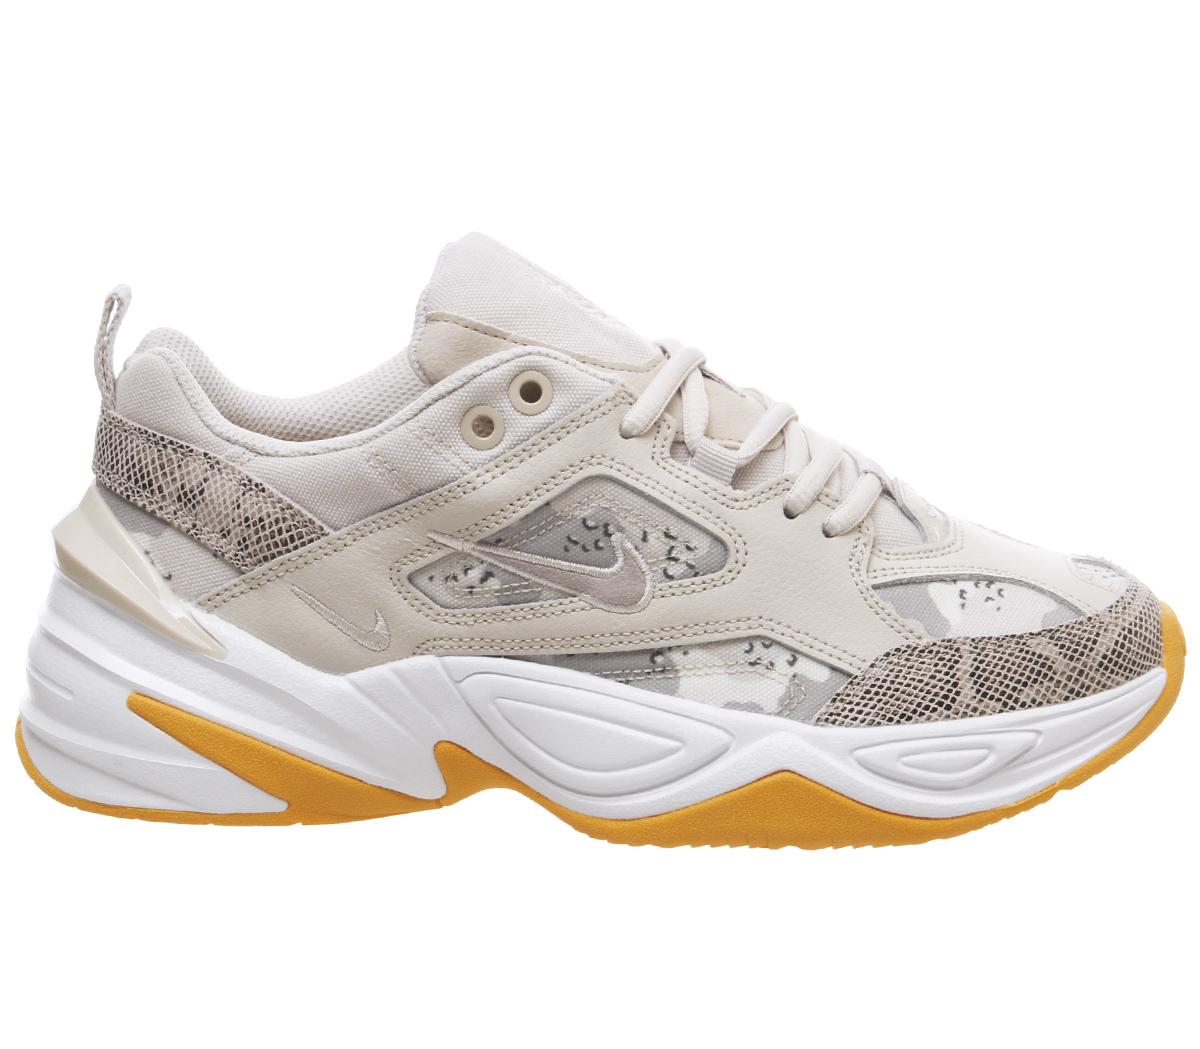 Nike M2k Tekno Trainers Orewood Brown Moon Particle Hyper Pink - Women ...